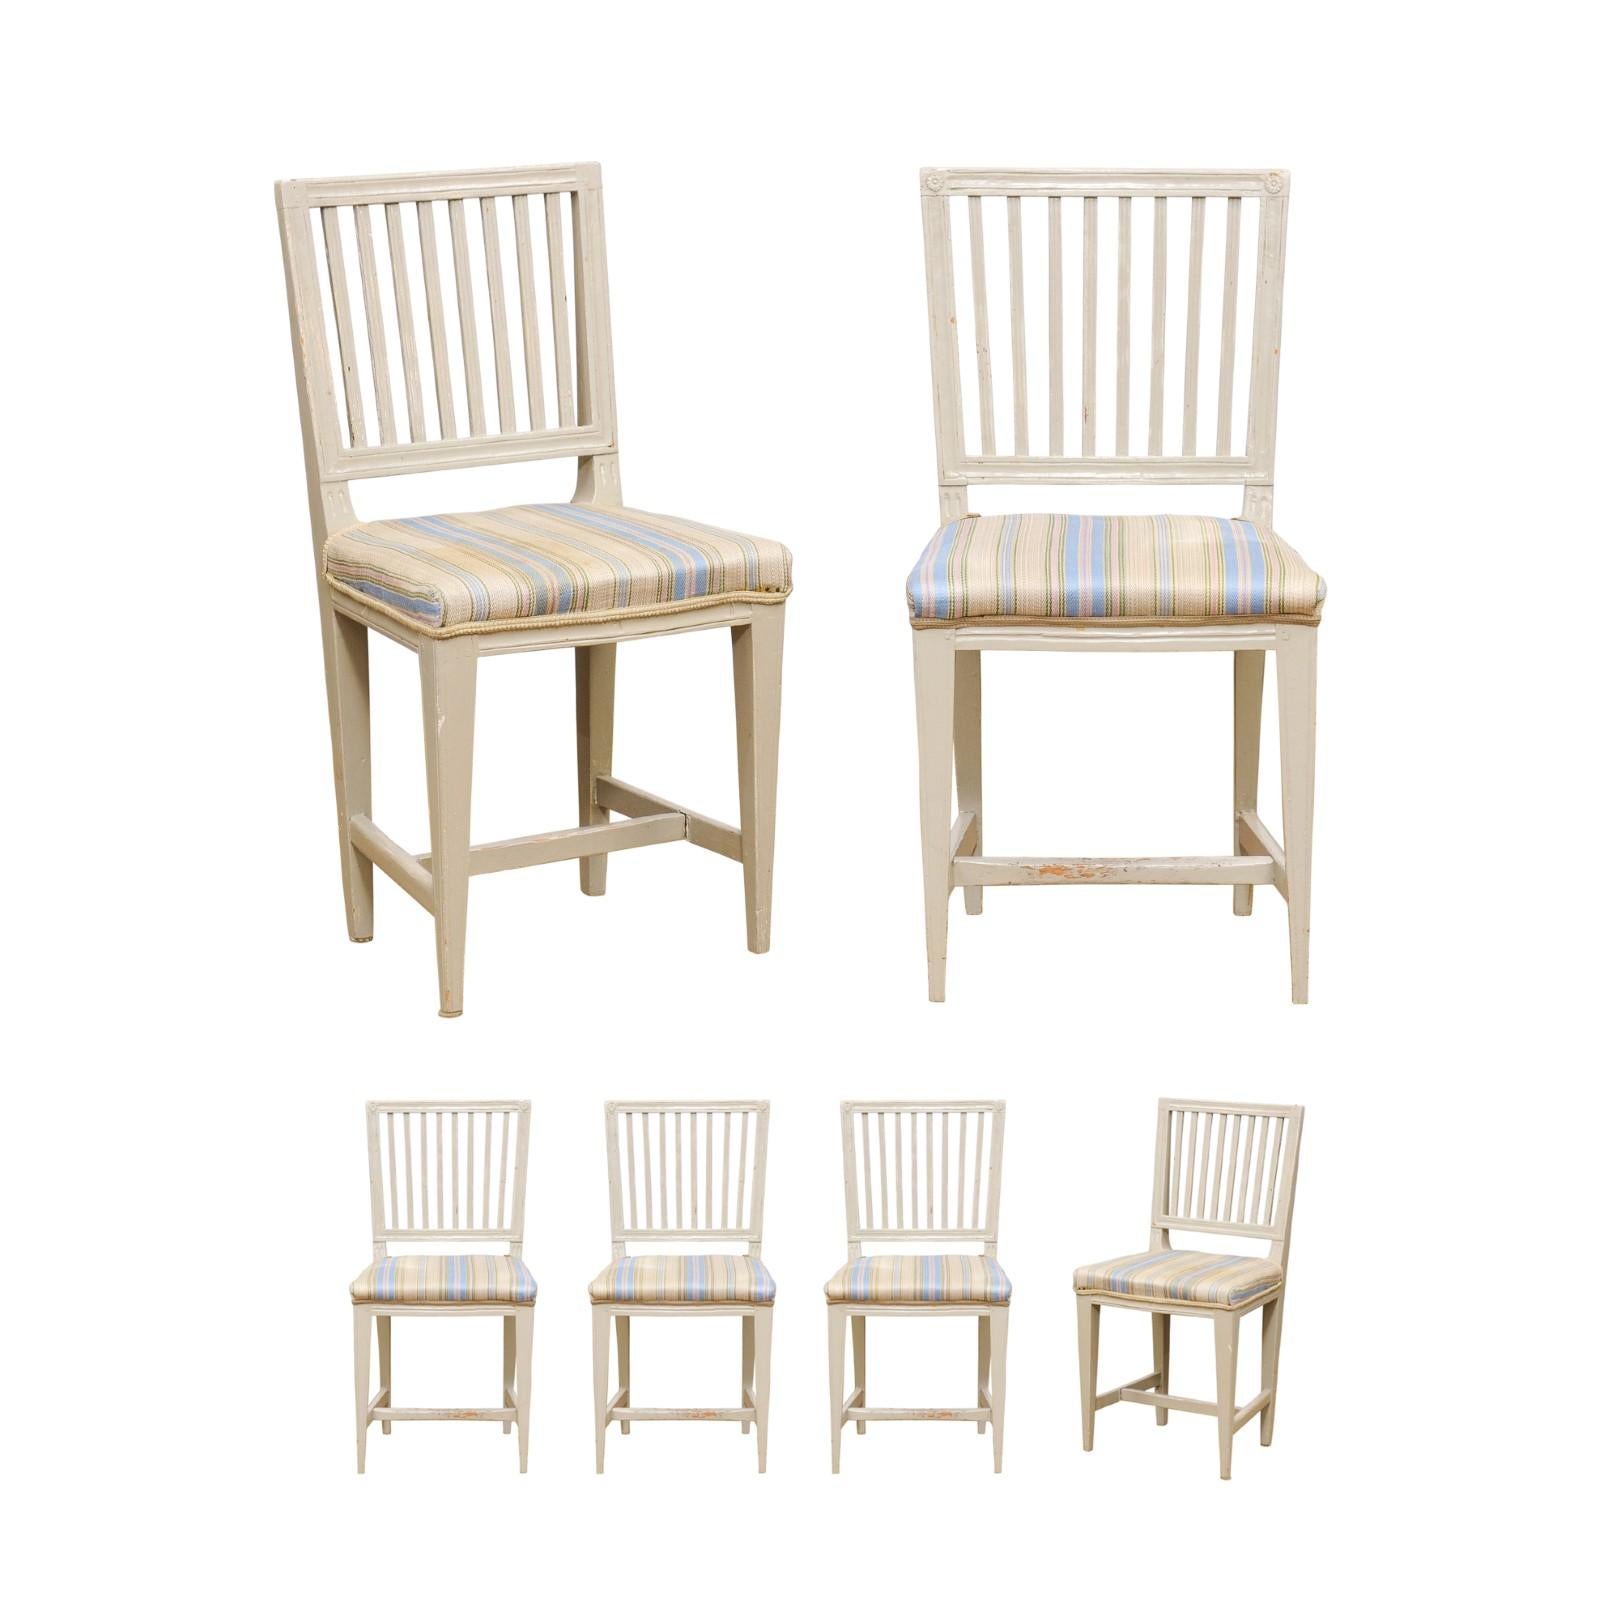 A set of six Swedish Gustavian style painted wood stick back side chairs from the mid 19th century, with tapered legs, carved rosettes and used upholstery. Created in Sweden during the 1850s, each of this set of six side chairs features a